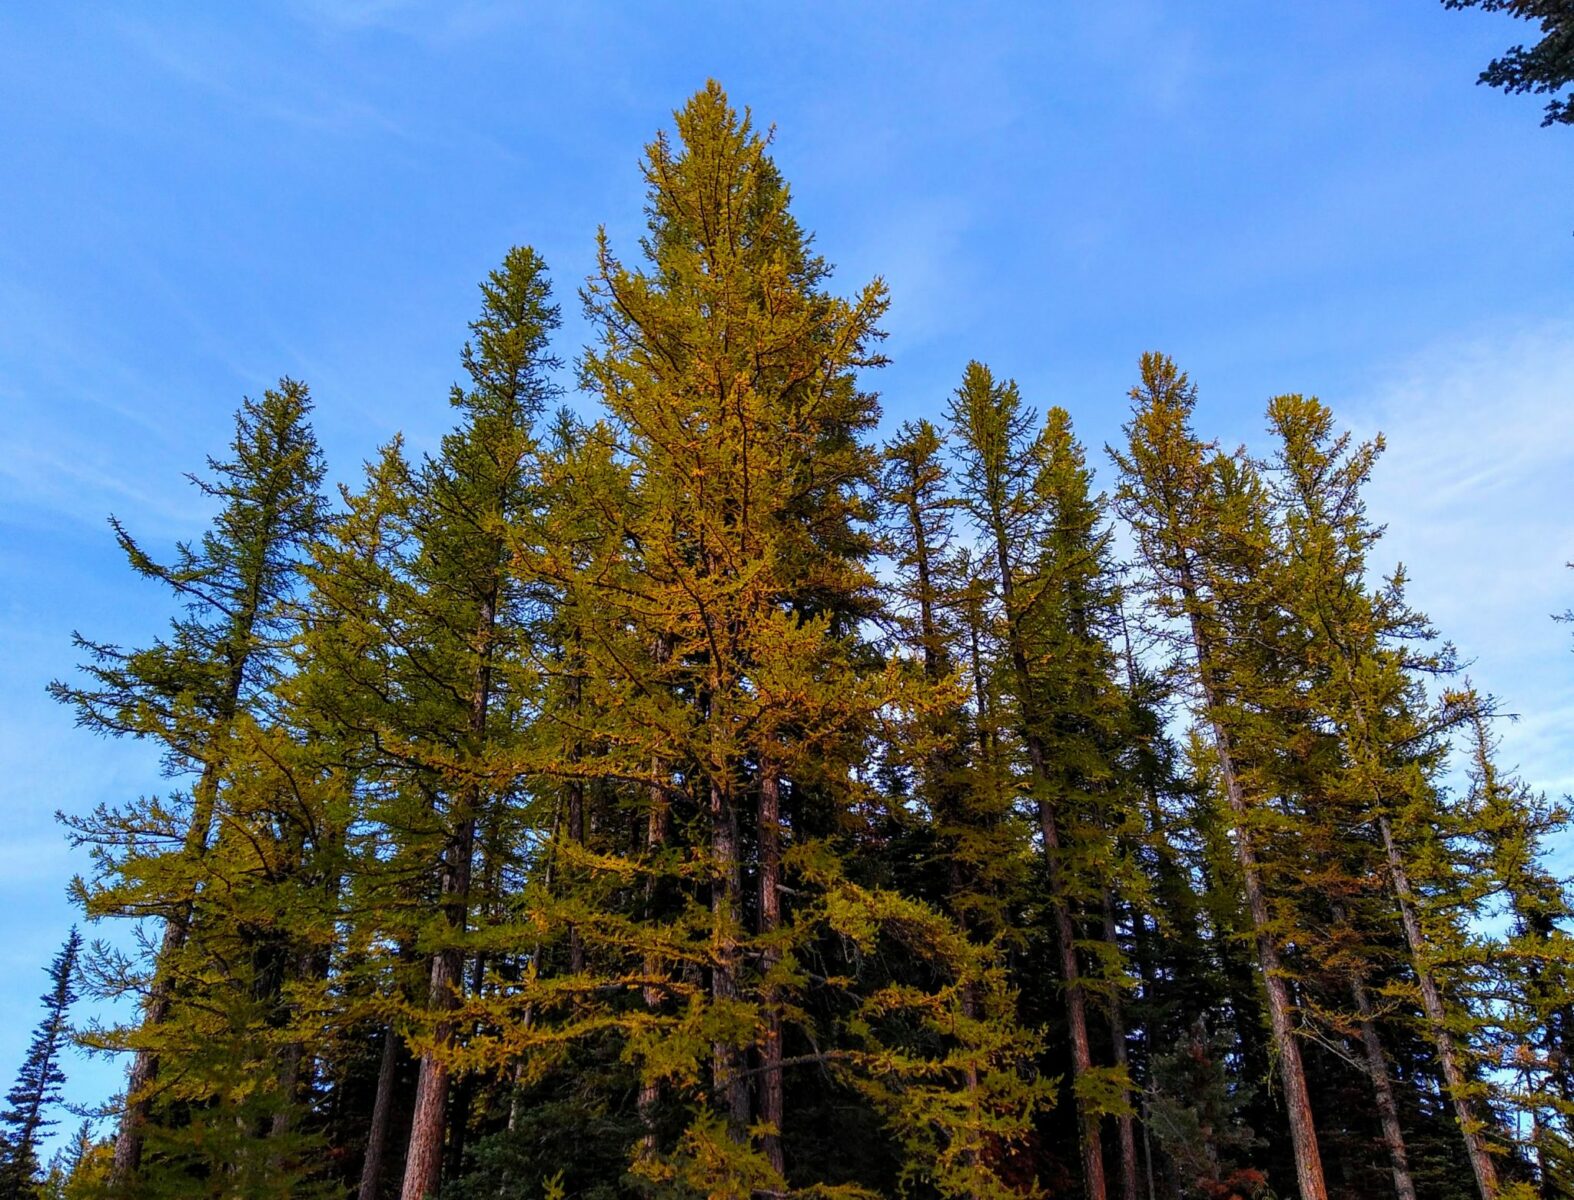 Golden larch trees against a blue sky on the Lake Clara Trail